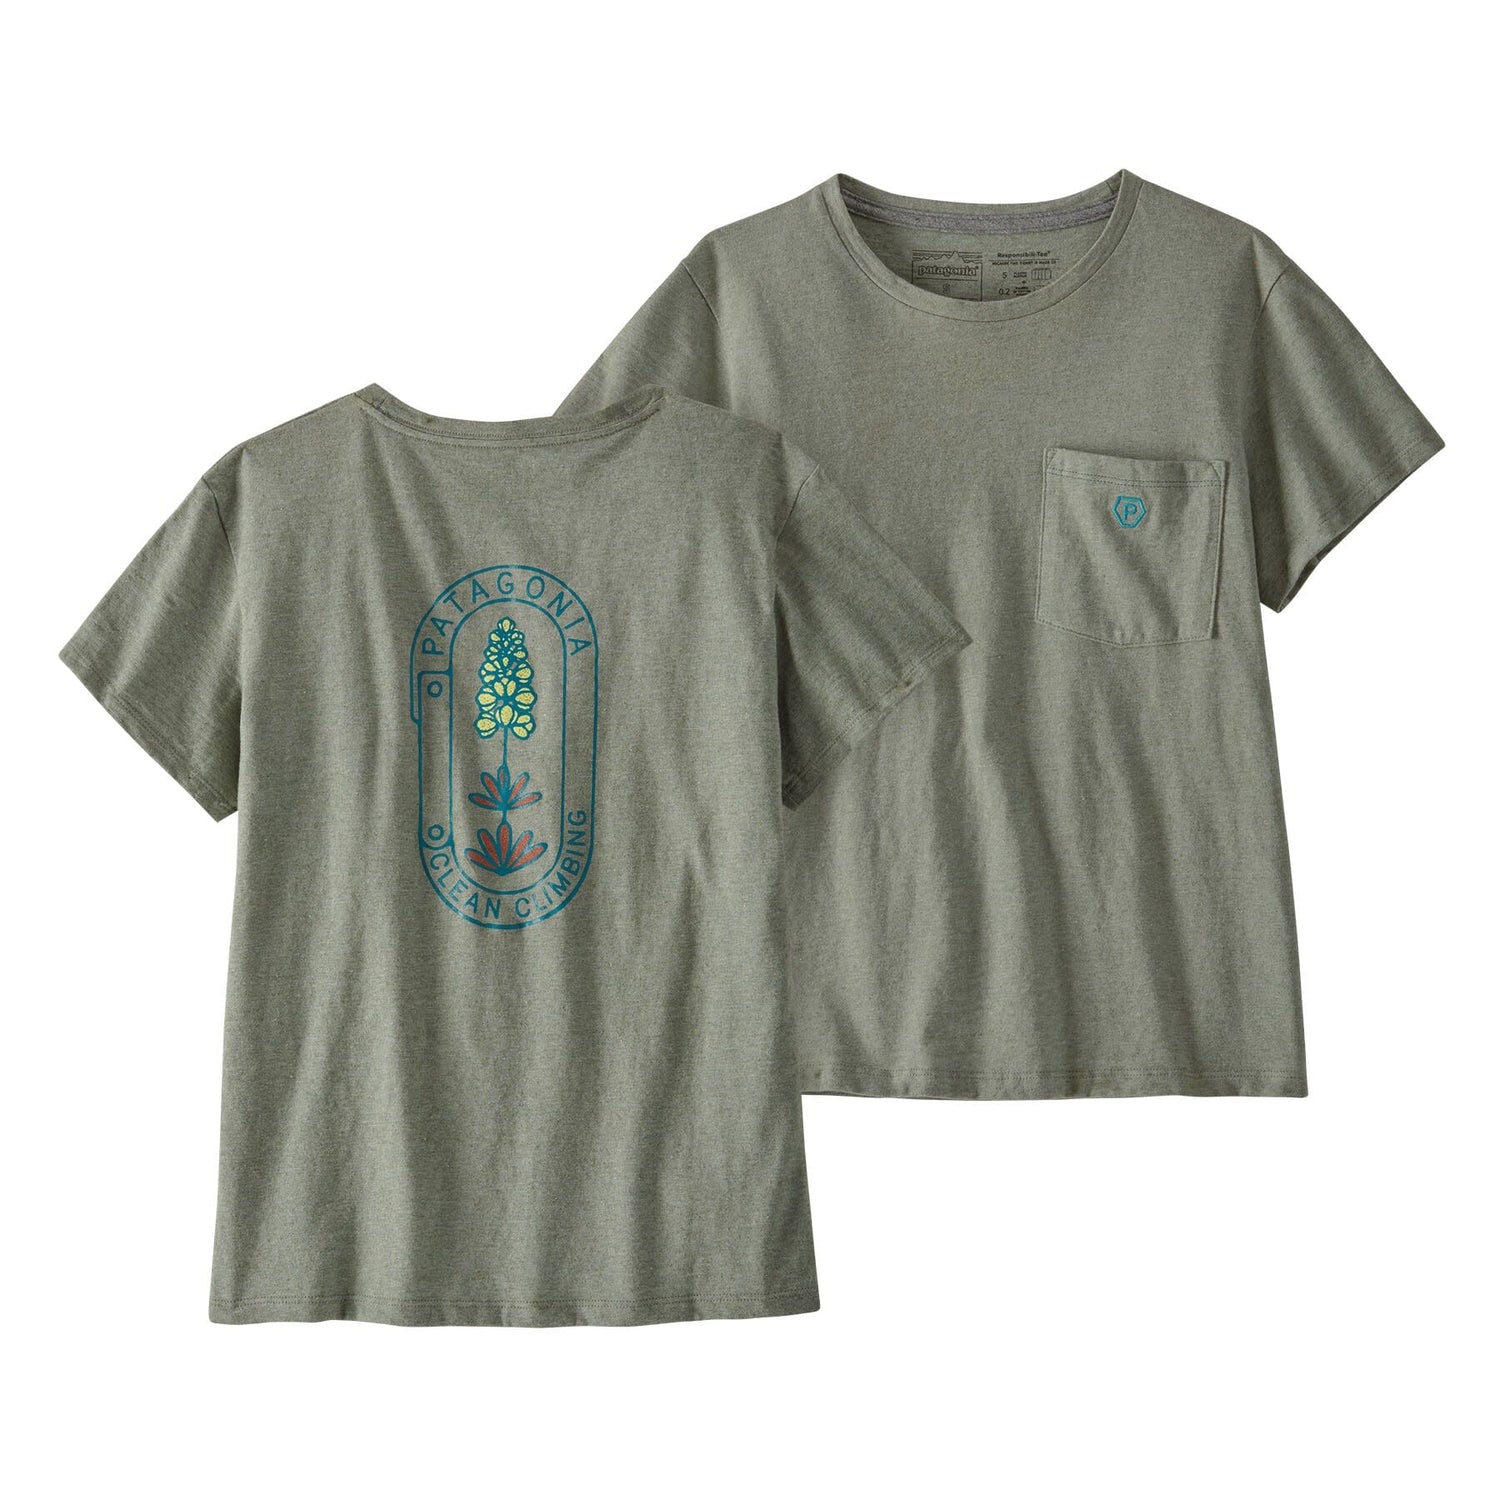 Patagonia W's Clean Climb Bloom Pocket Responsibili-Tee - Recycled Cotton & Recycled Polyester Sleet Green Shirt